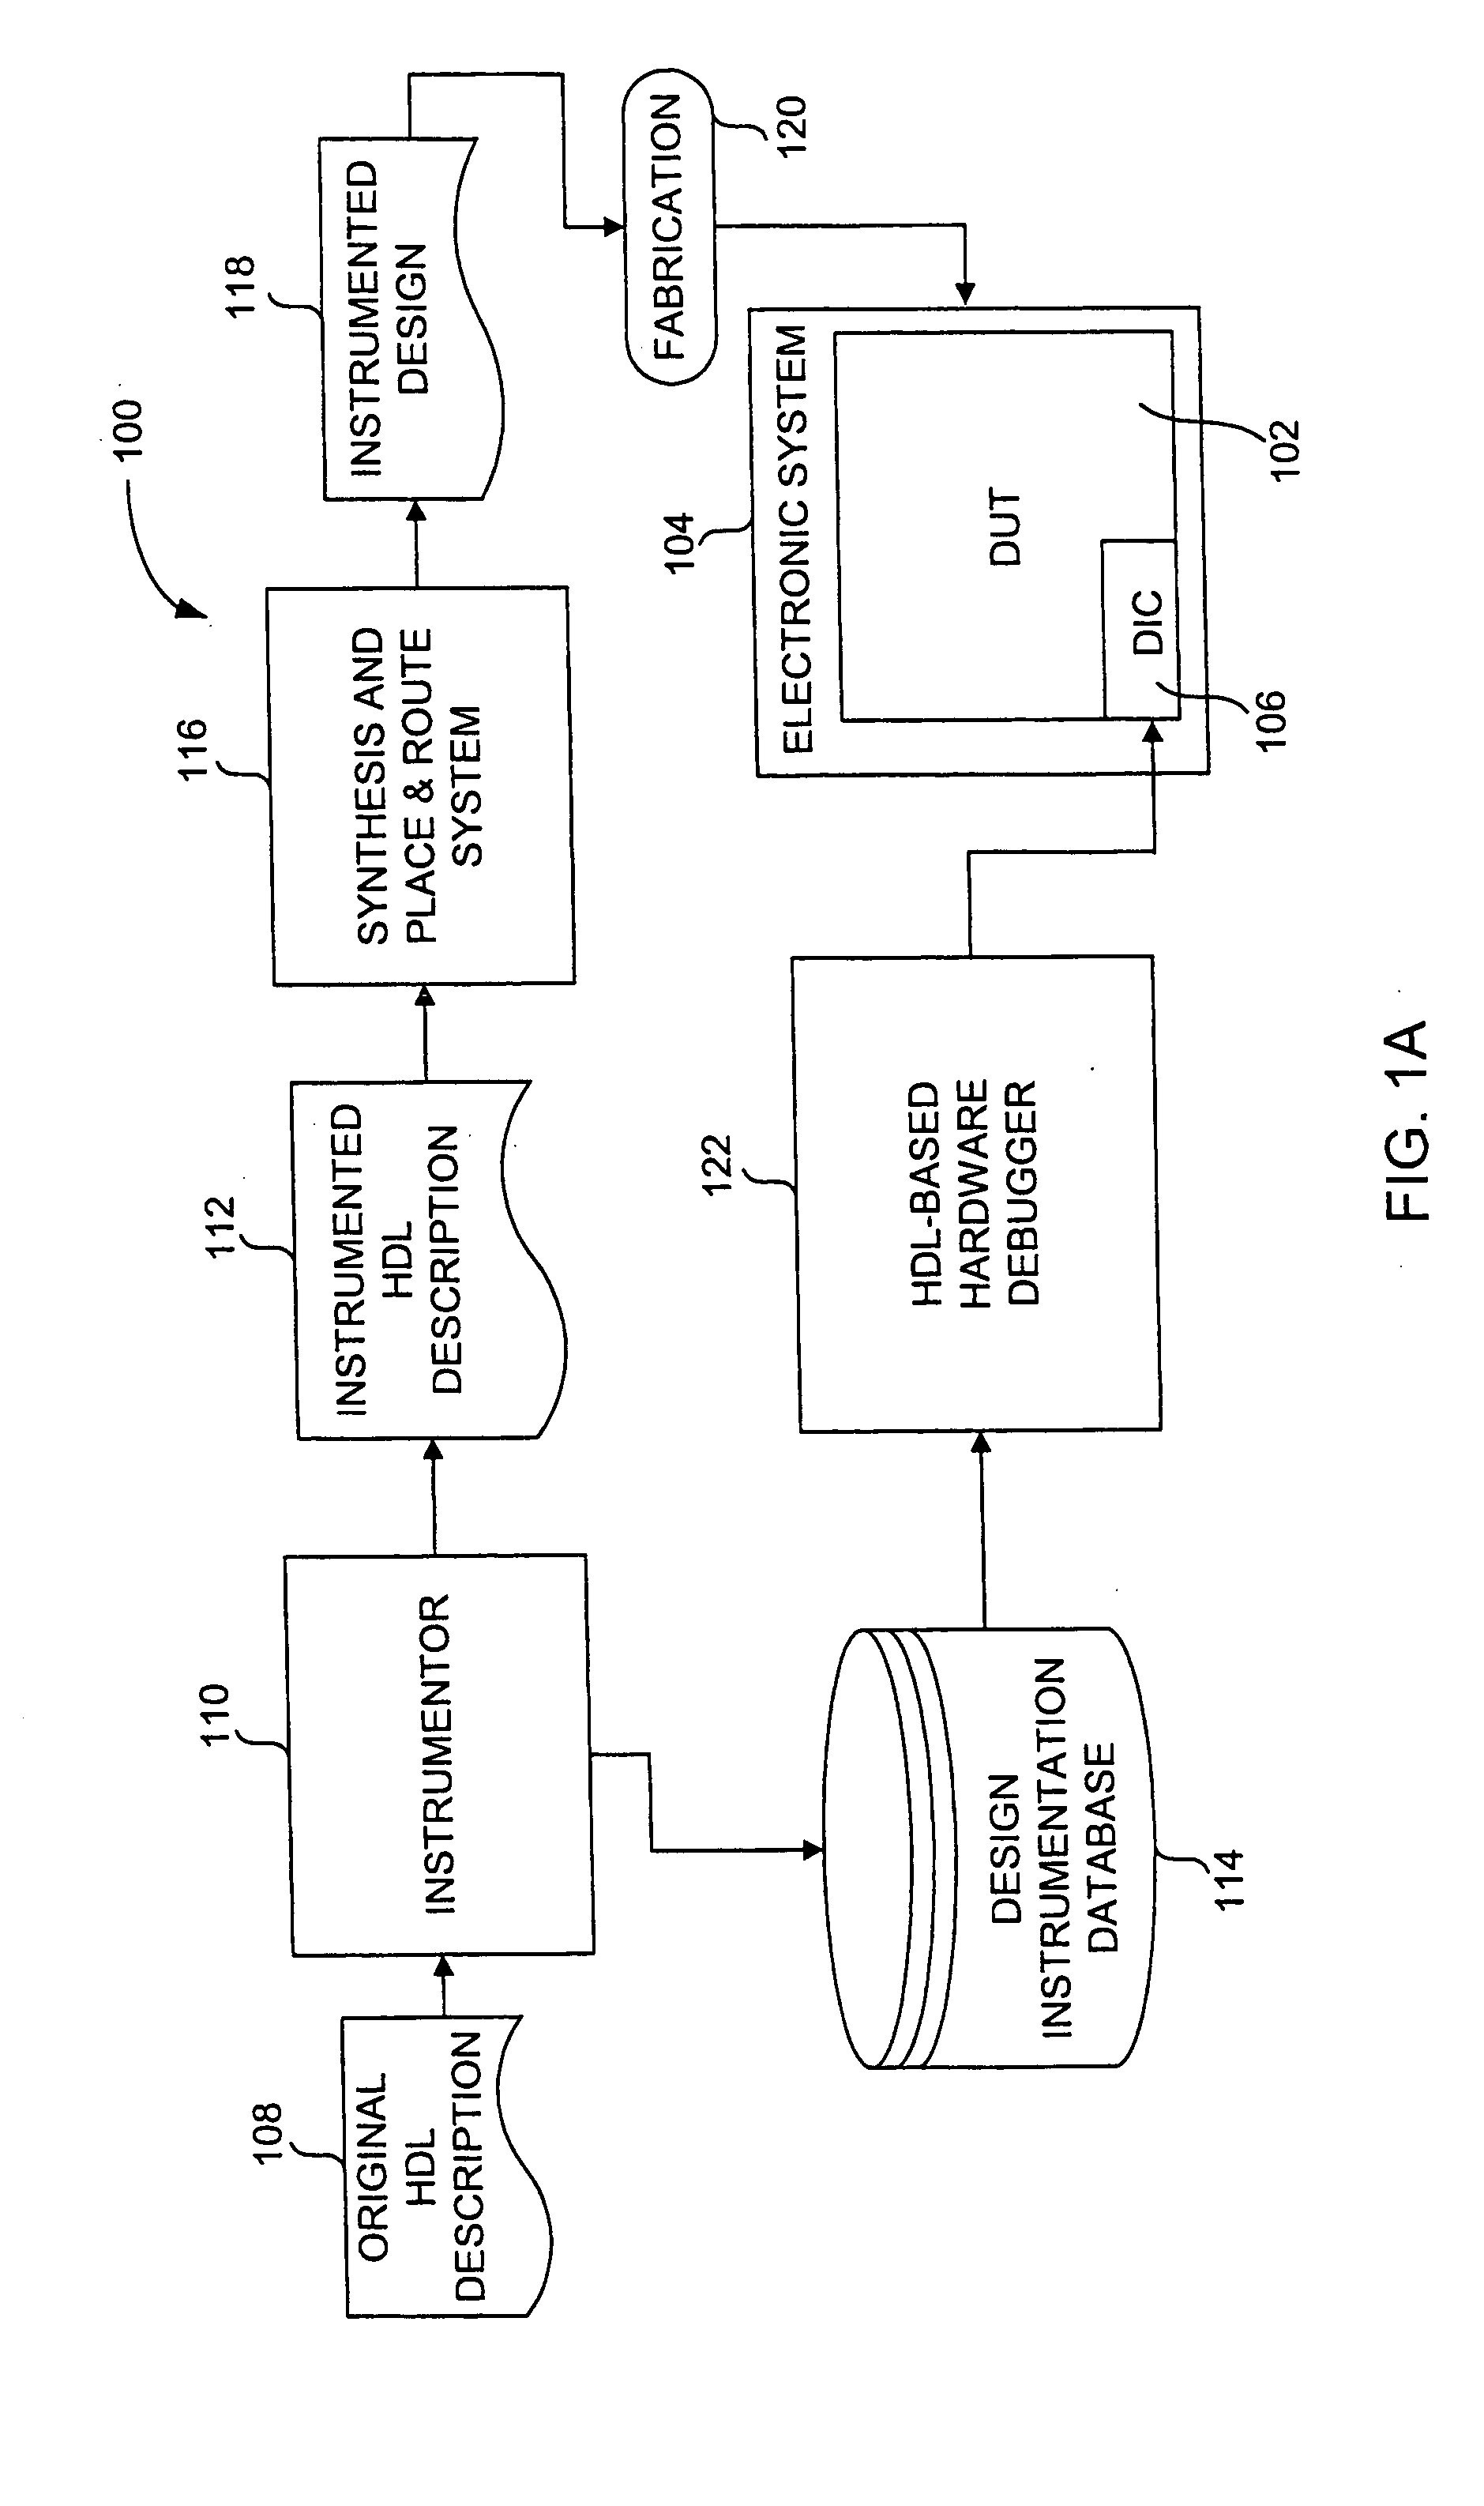 Method and user interface for debugging an electronic system